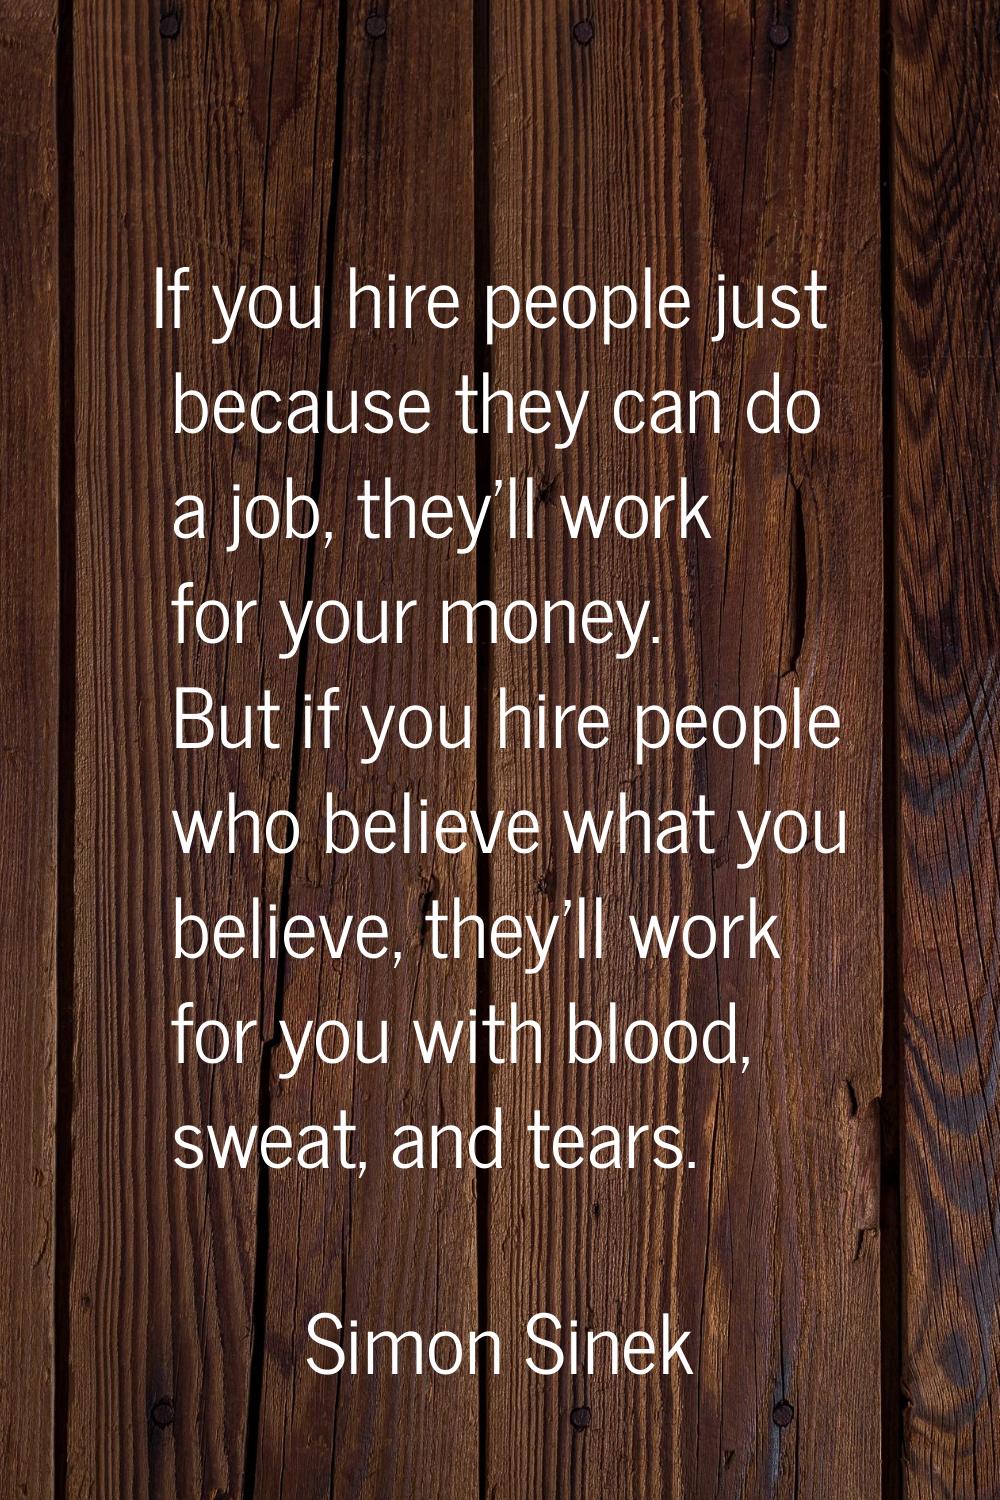 If you hire people just because they can do a job, they'll work for your money. But if you hire peo